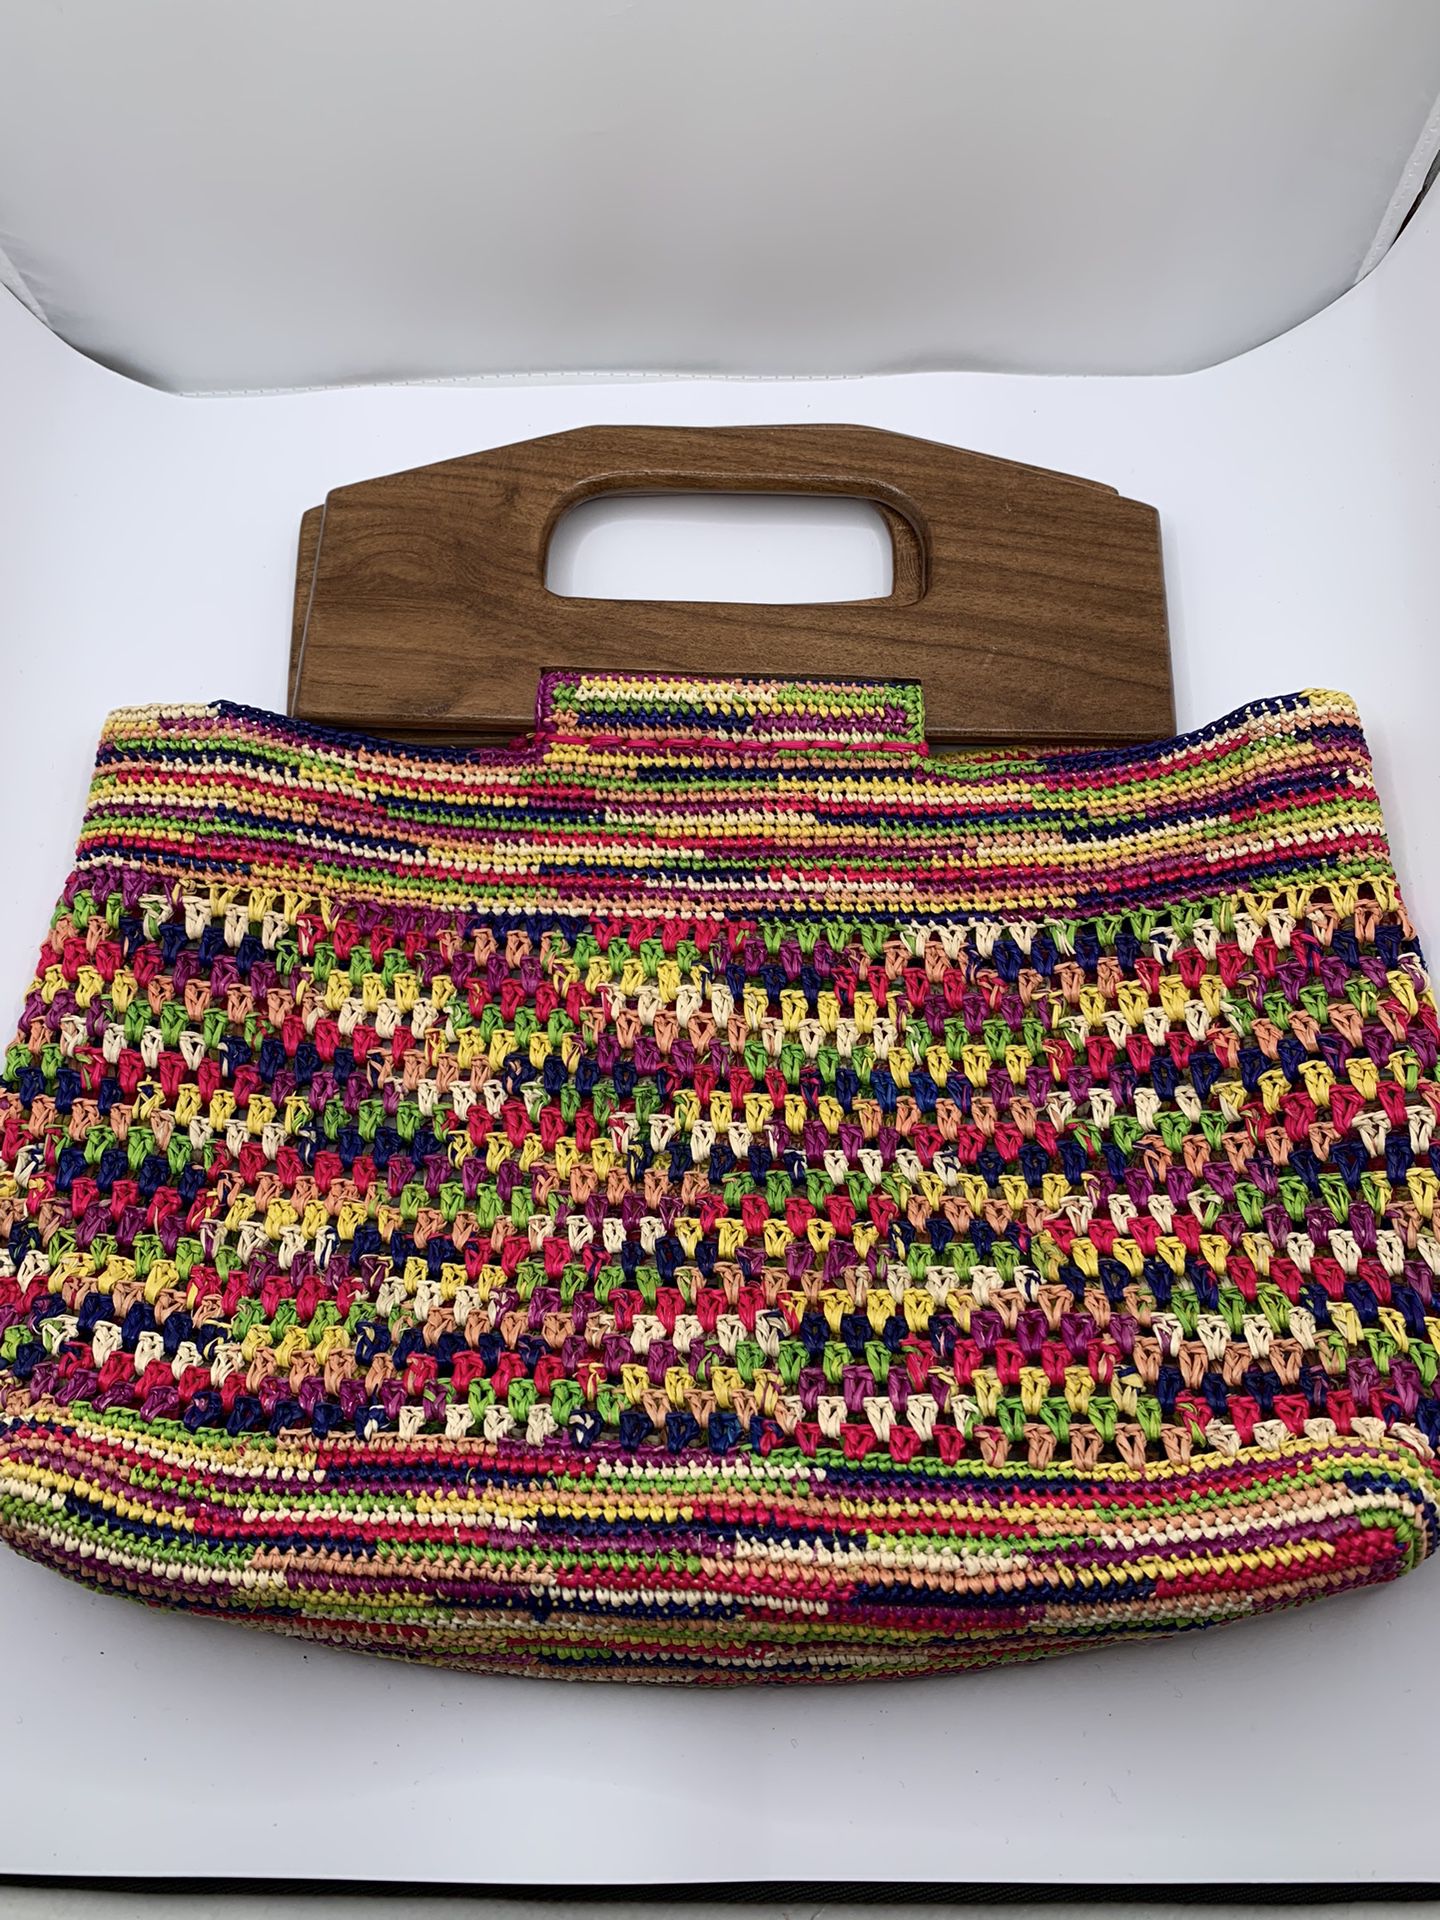 Boho Straw  Multi Colored Crochet Hand Bag with Large Wood Handles